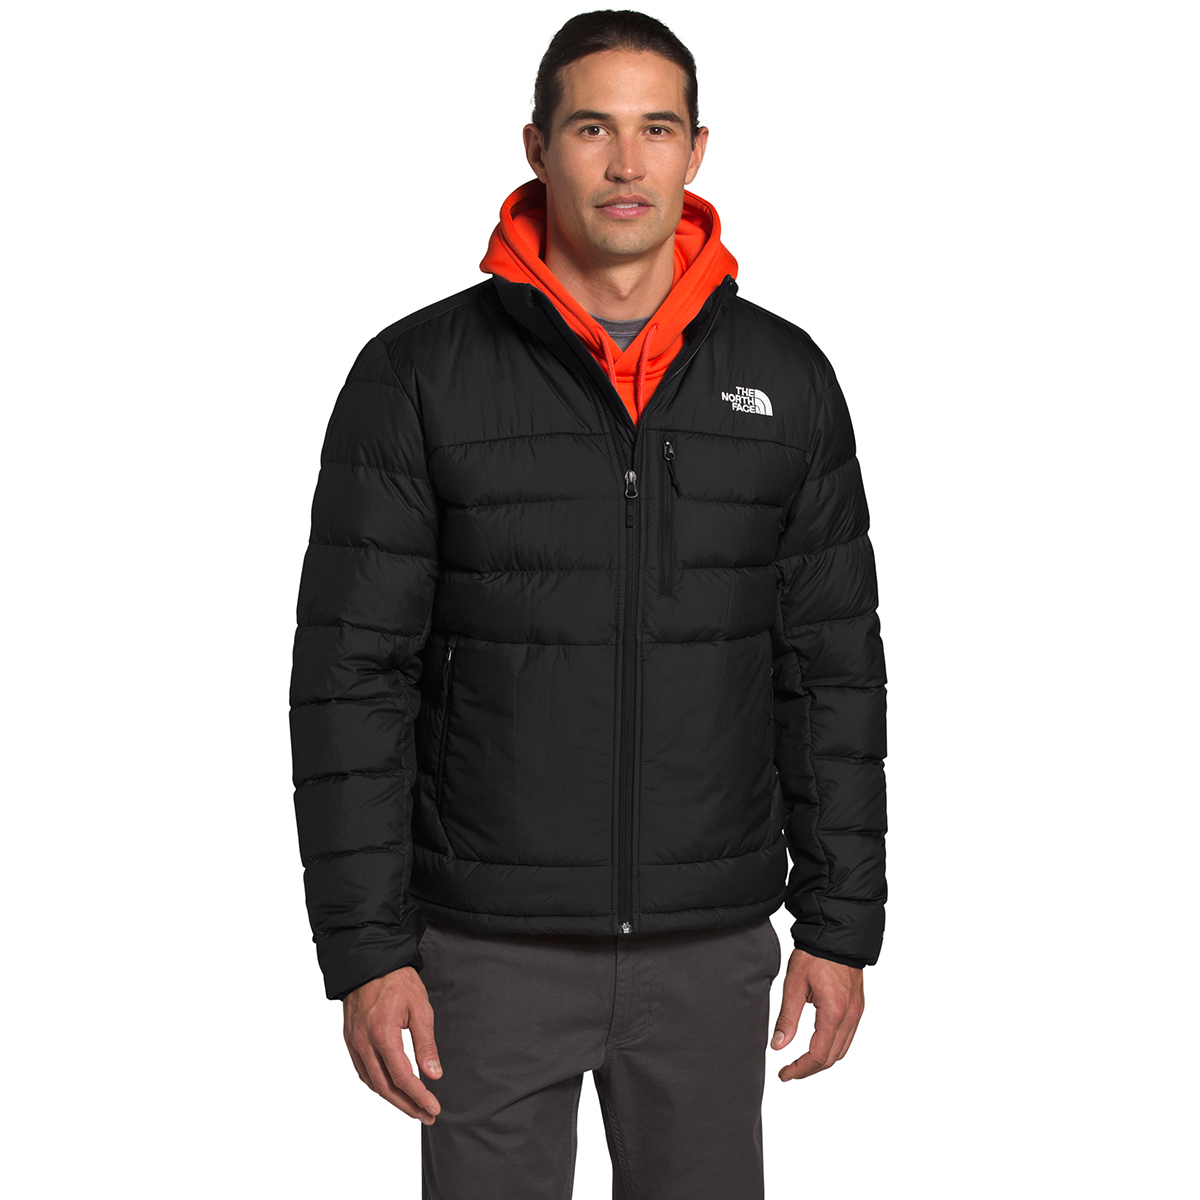 THE NORTH FACE Men's Aconcagua 2 Jacket - Eastern Mountain Sports